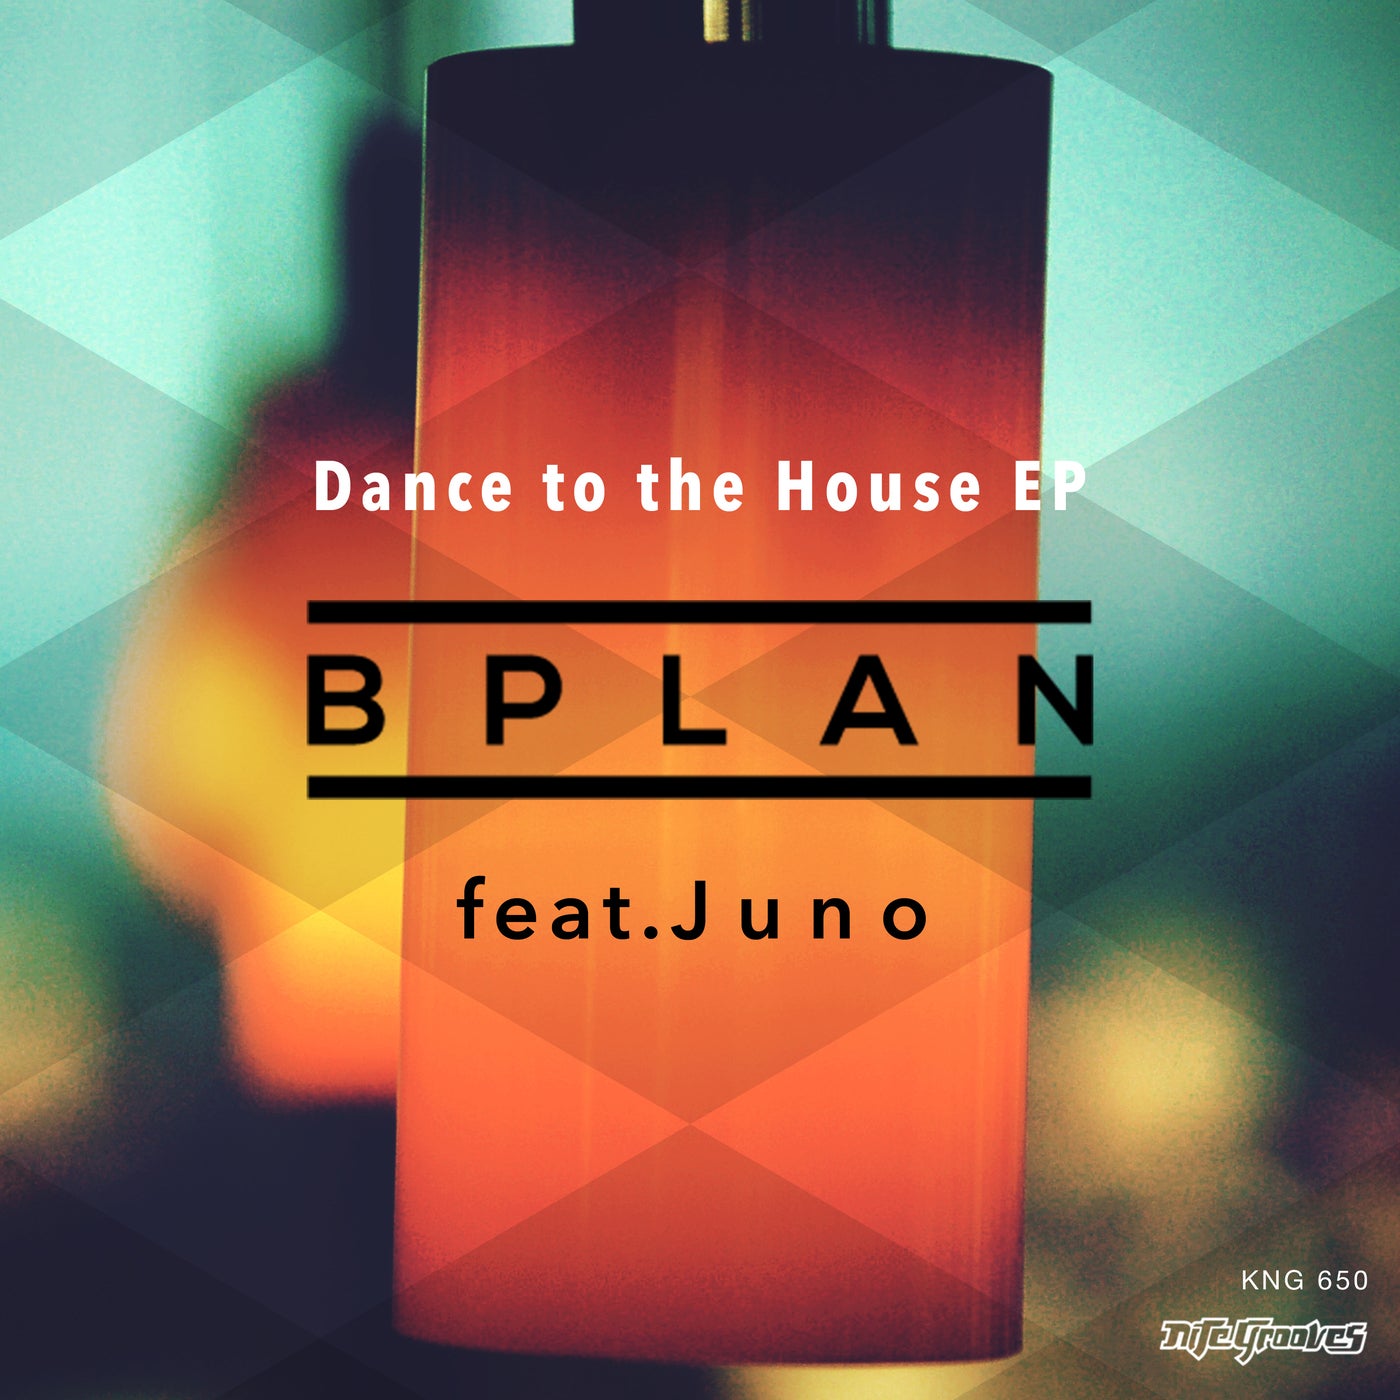 Dance to the House EP